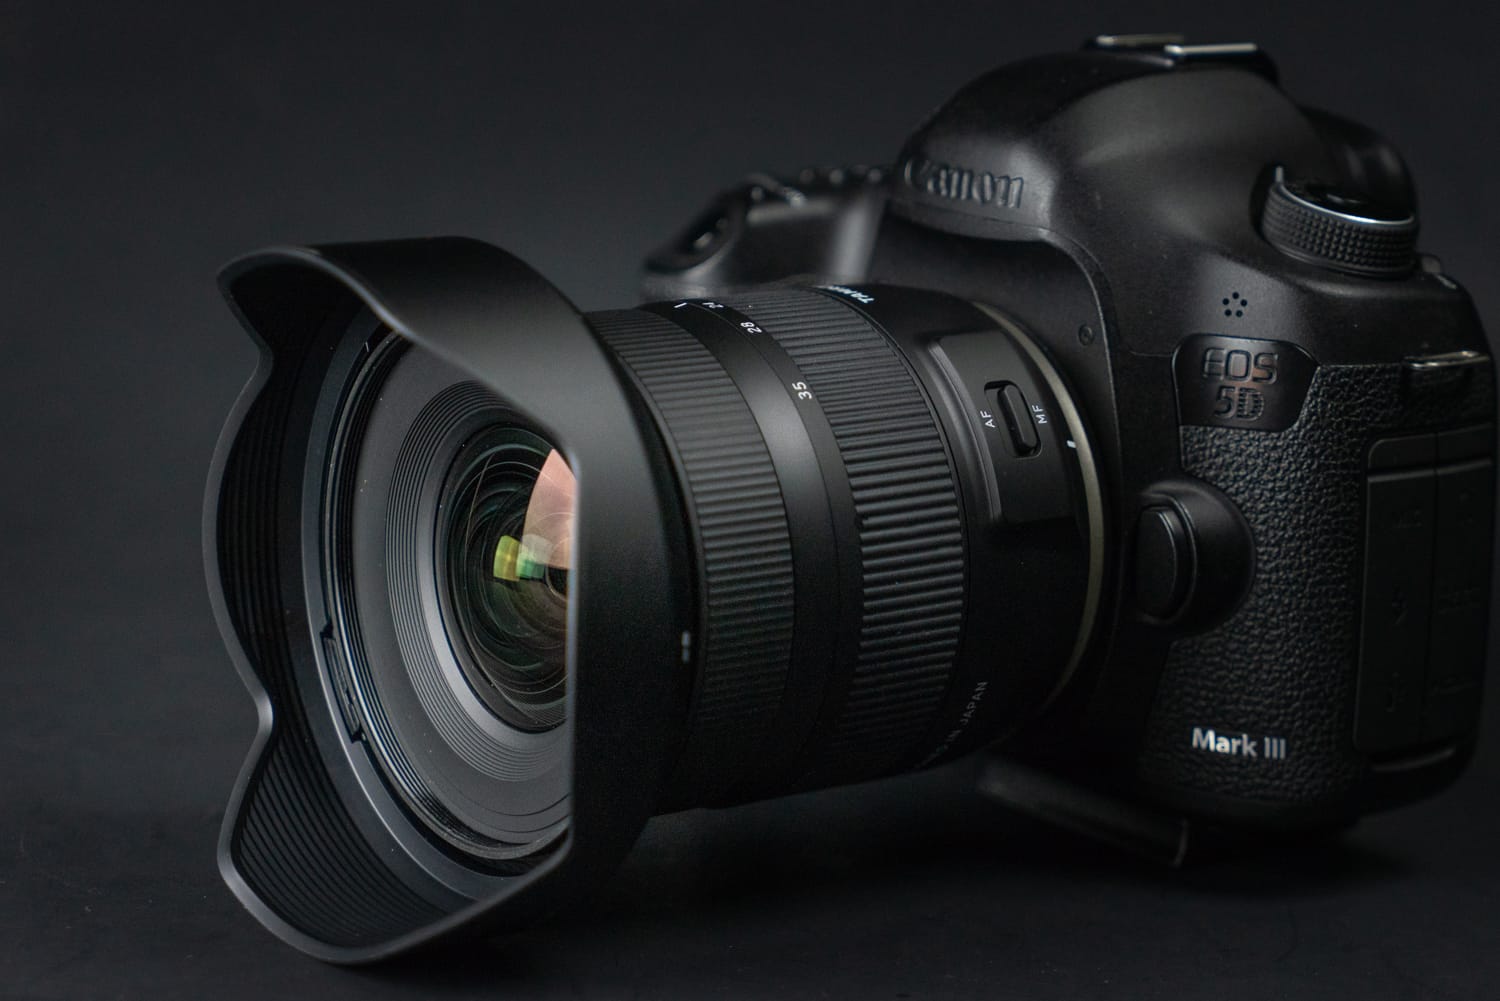 Review of the Tamron 17-35mm f/2.8-4 Di OSD Lens